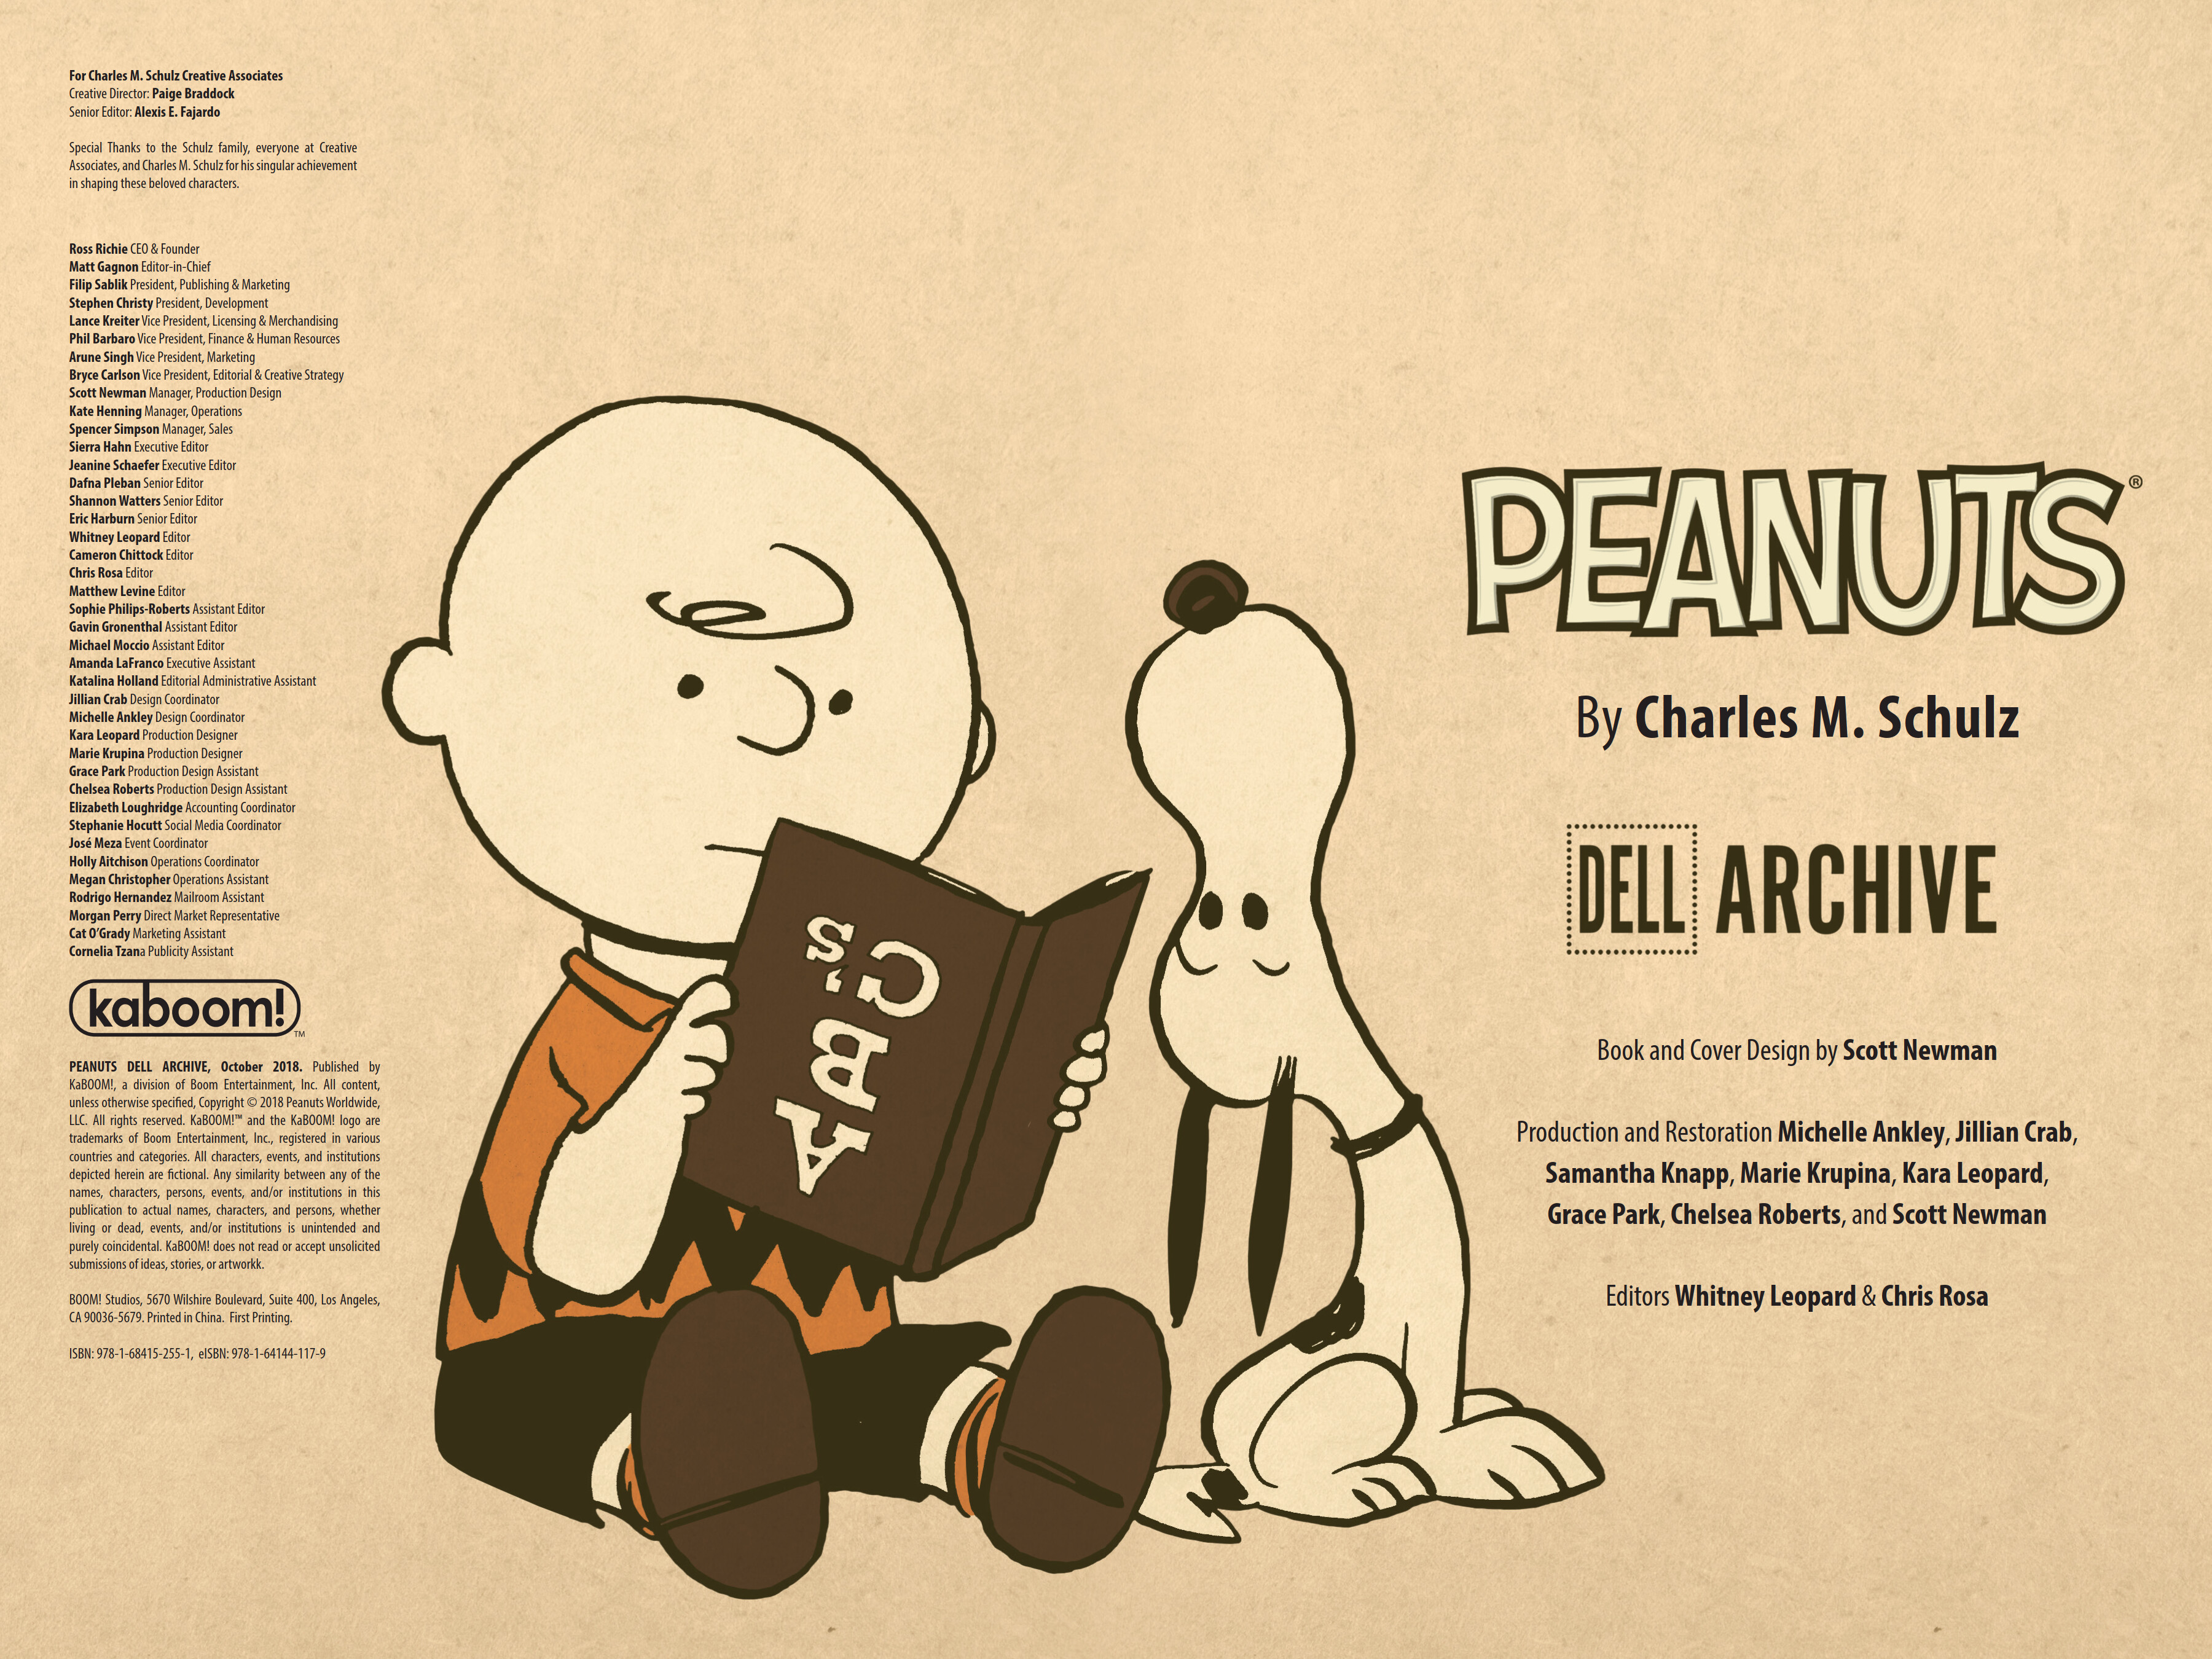 Peanuts Dell Archive (2018): Chapter 1 - Page 3